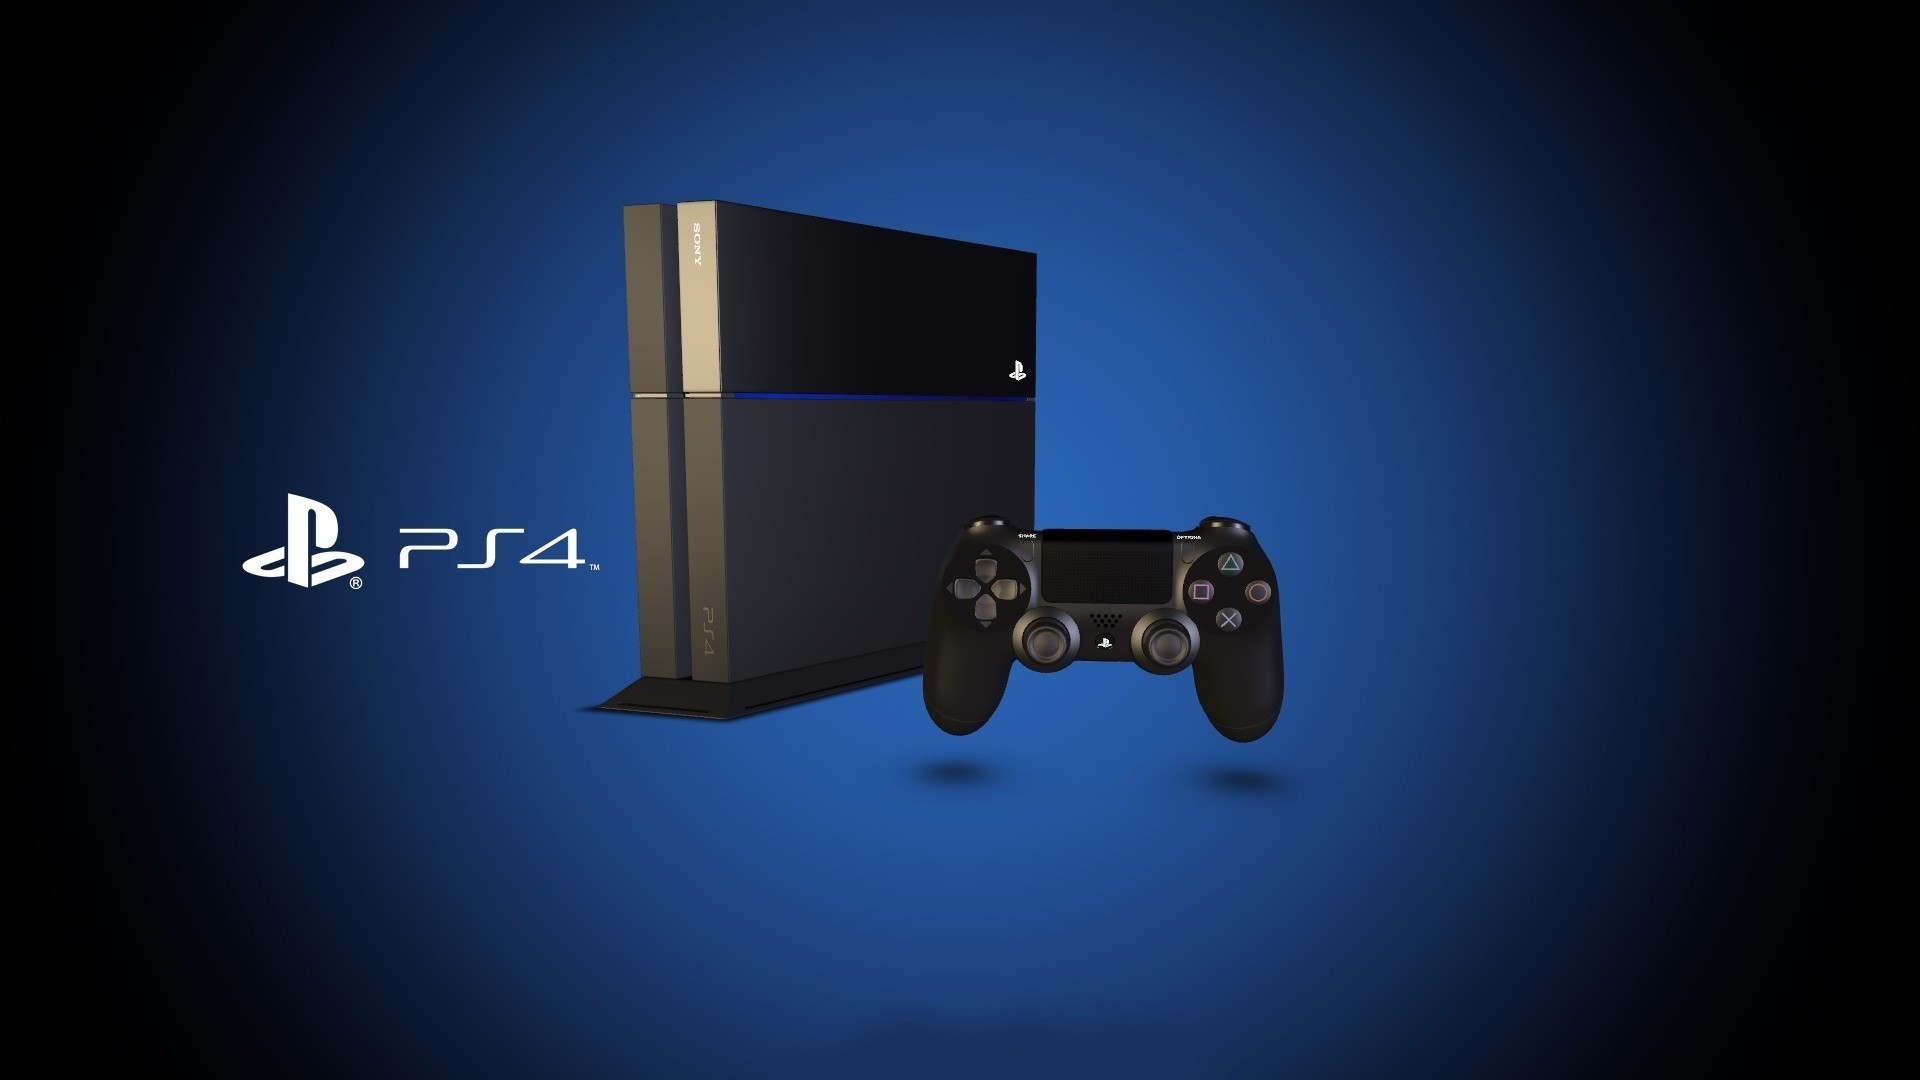 Wallpaper Playstation Hi Tech Ps4 Sony Game Console Asiatic